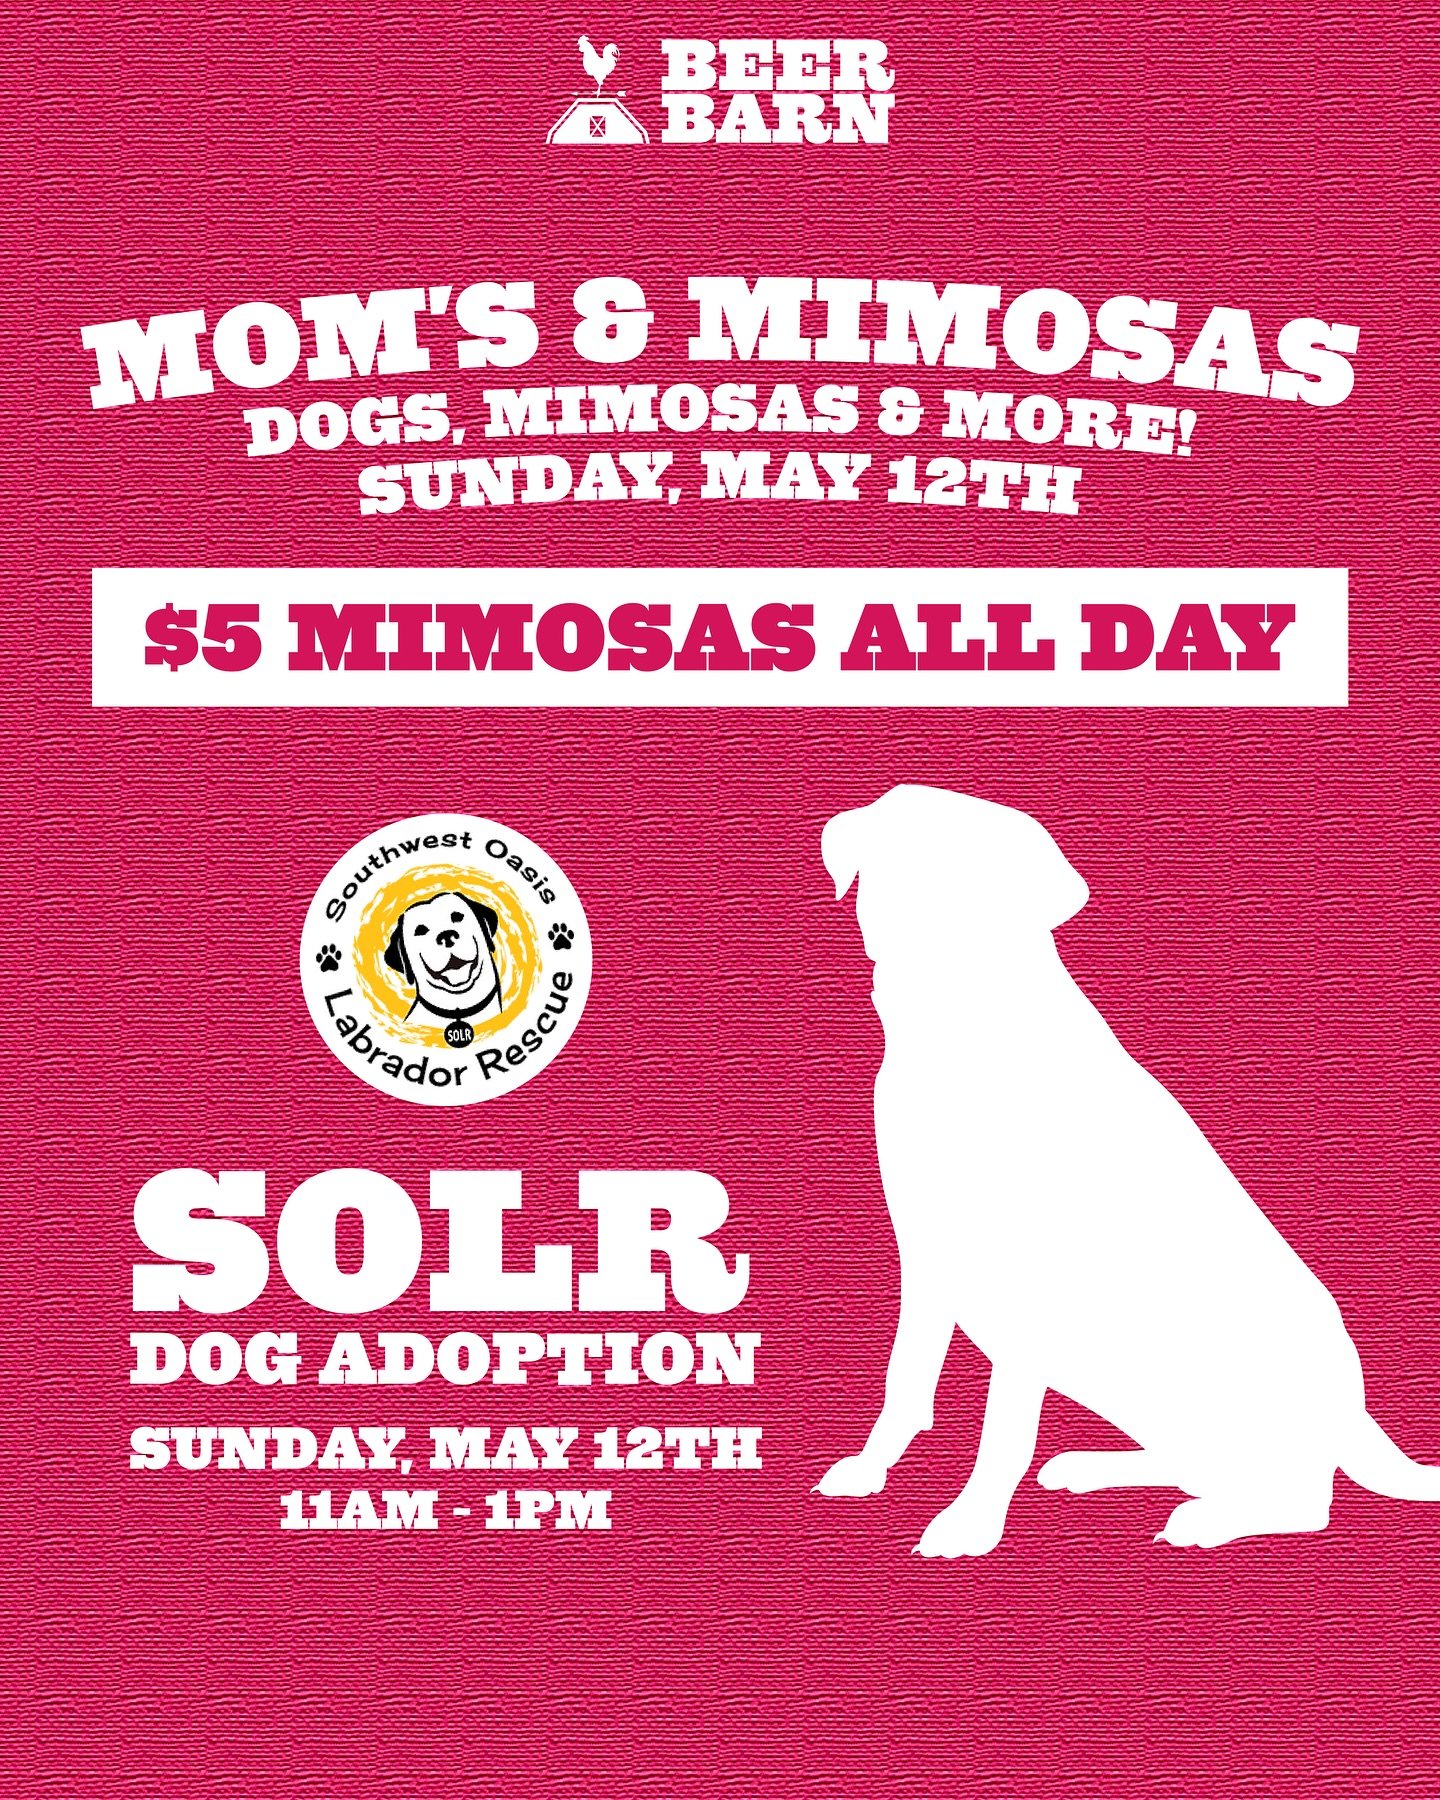 CALLIN ALL YOU MOMS AND DOG LOVERS!

Join us Sunday, May 12th, as we&rsquo;ll be celebrating all you moms out there! We&rsquo;ll be pouring $5 momosas ALL DAY LONG for Mother&rsquo;s Day. Plus our friends @southwestoasislabrescue will be in with some